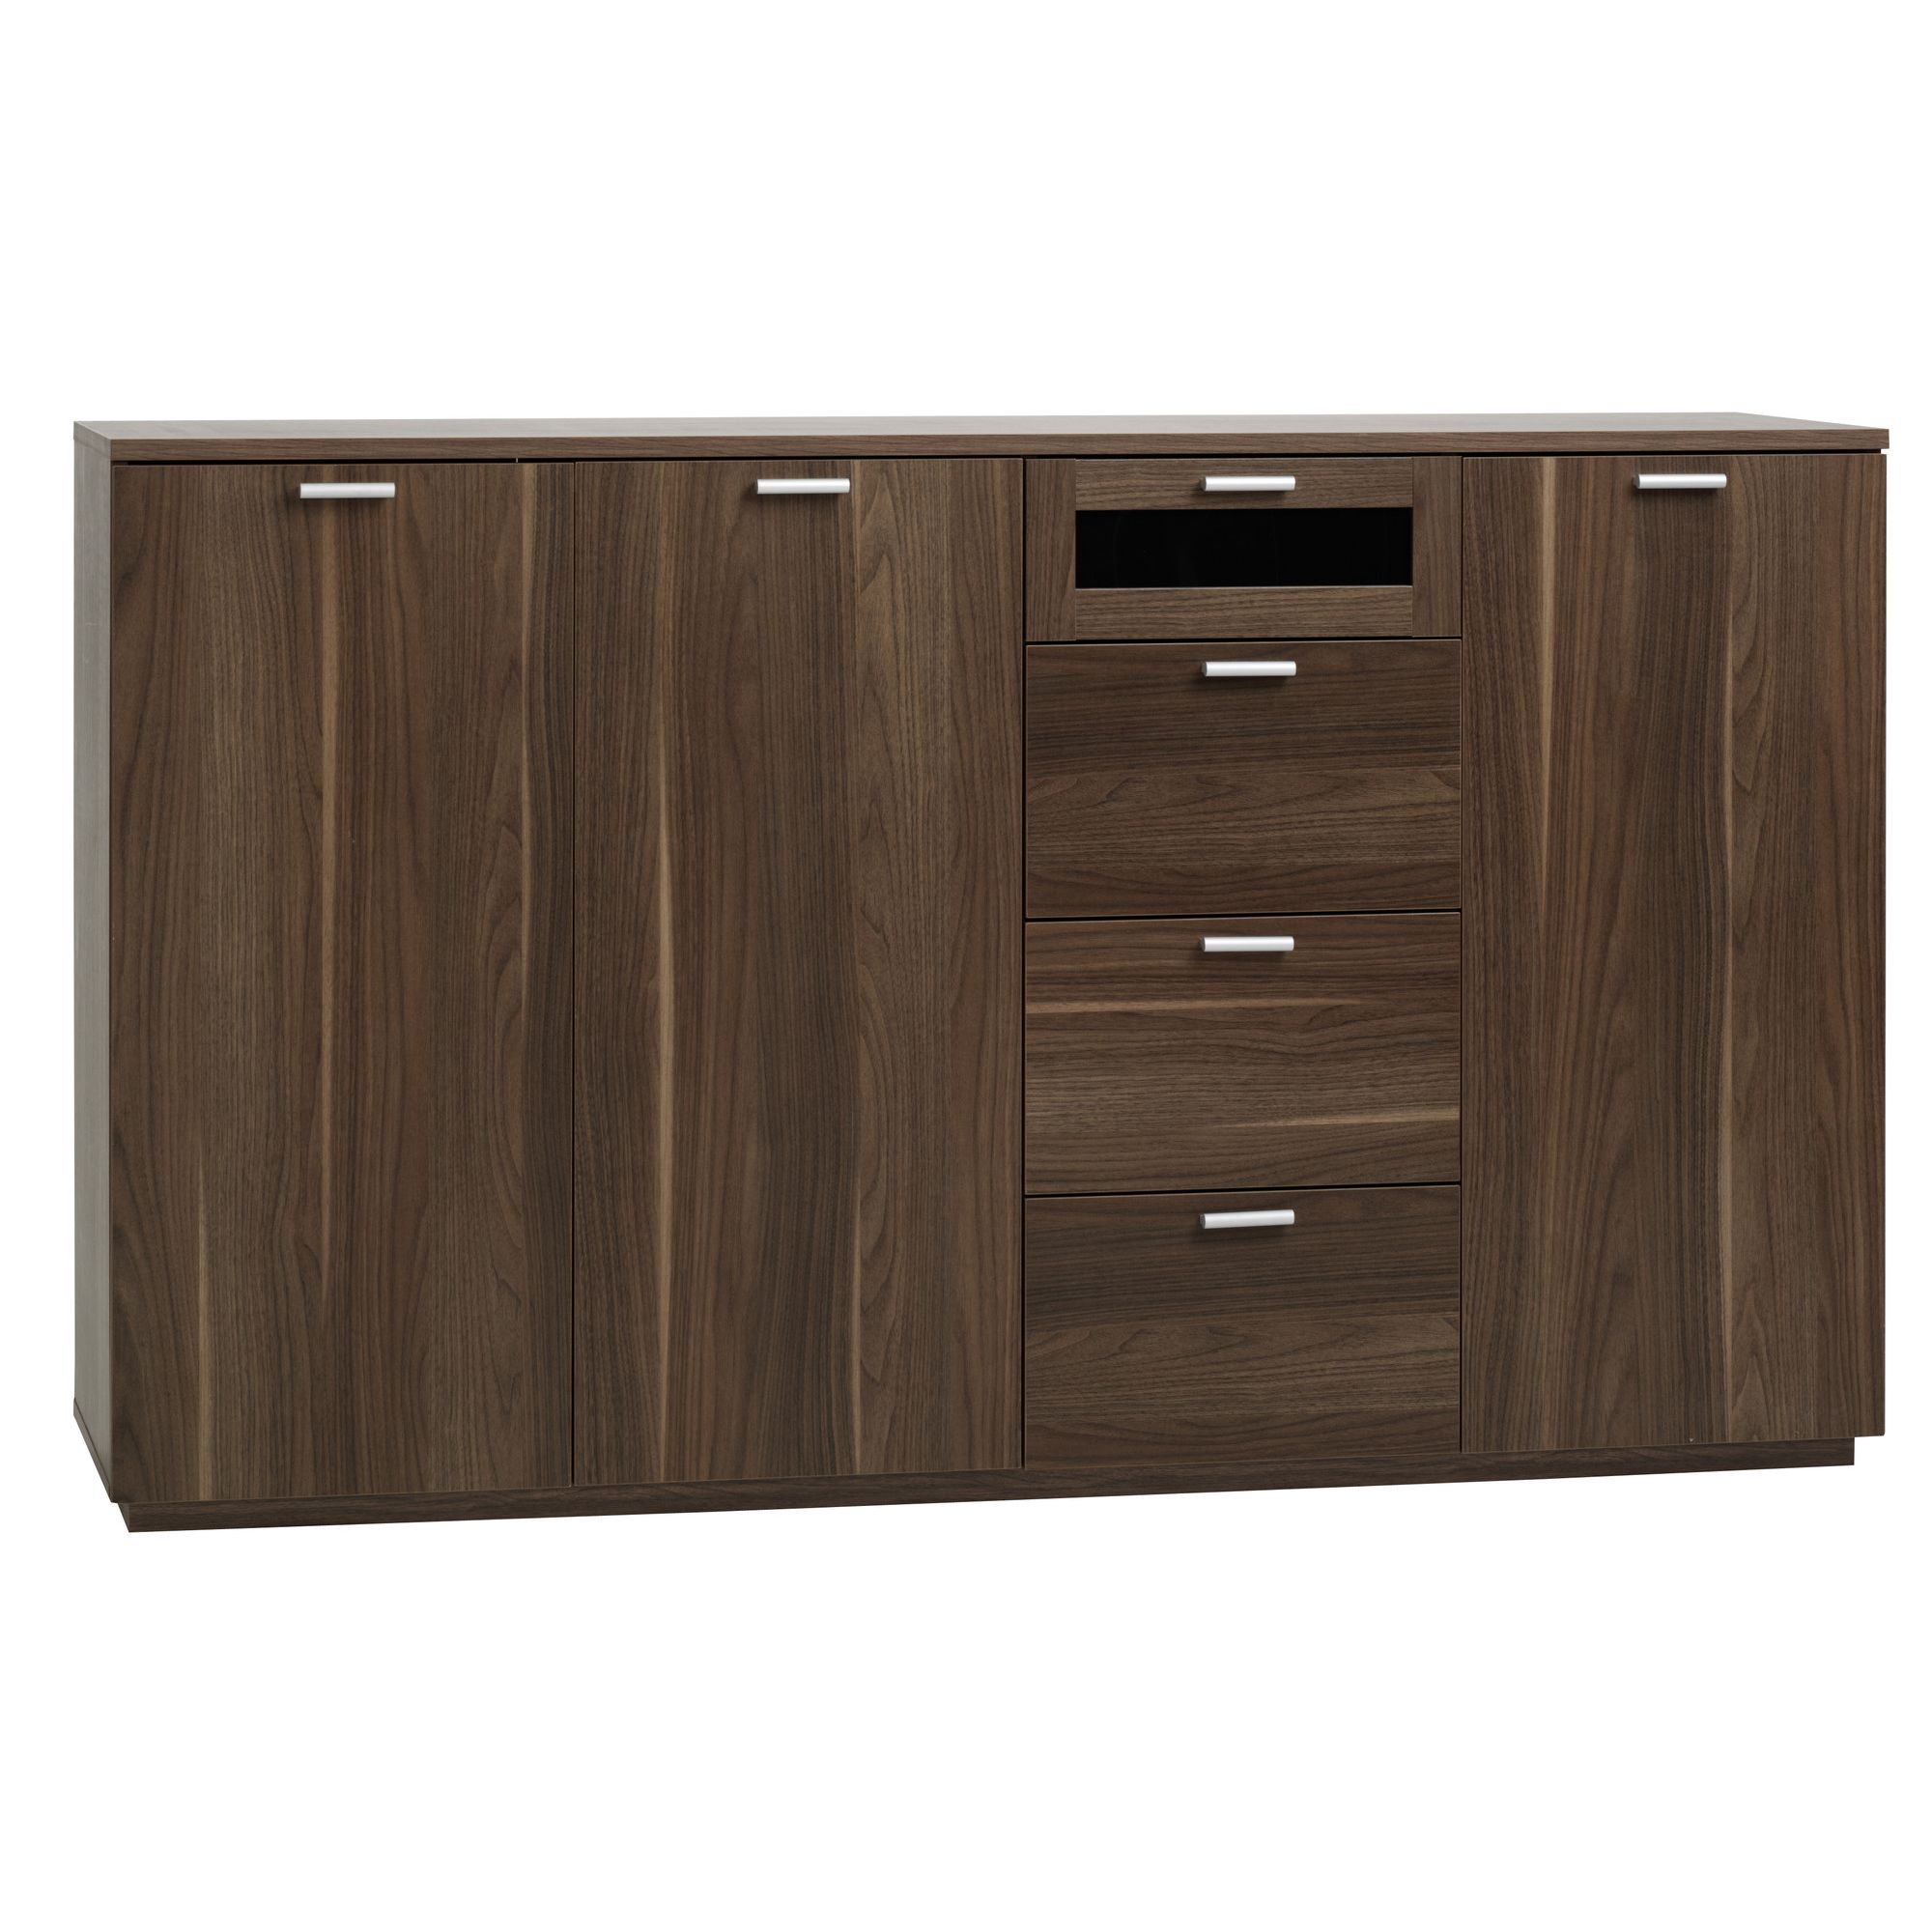 Tvilum New York Sideboard with Three Doors and Four Drawers in Dark Walnut at Tesco Direct